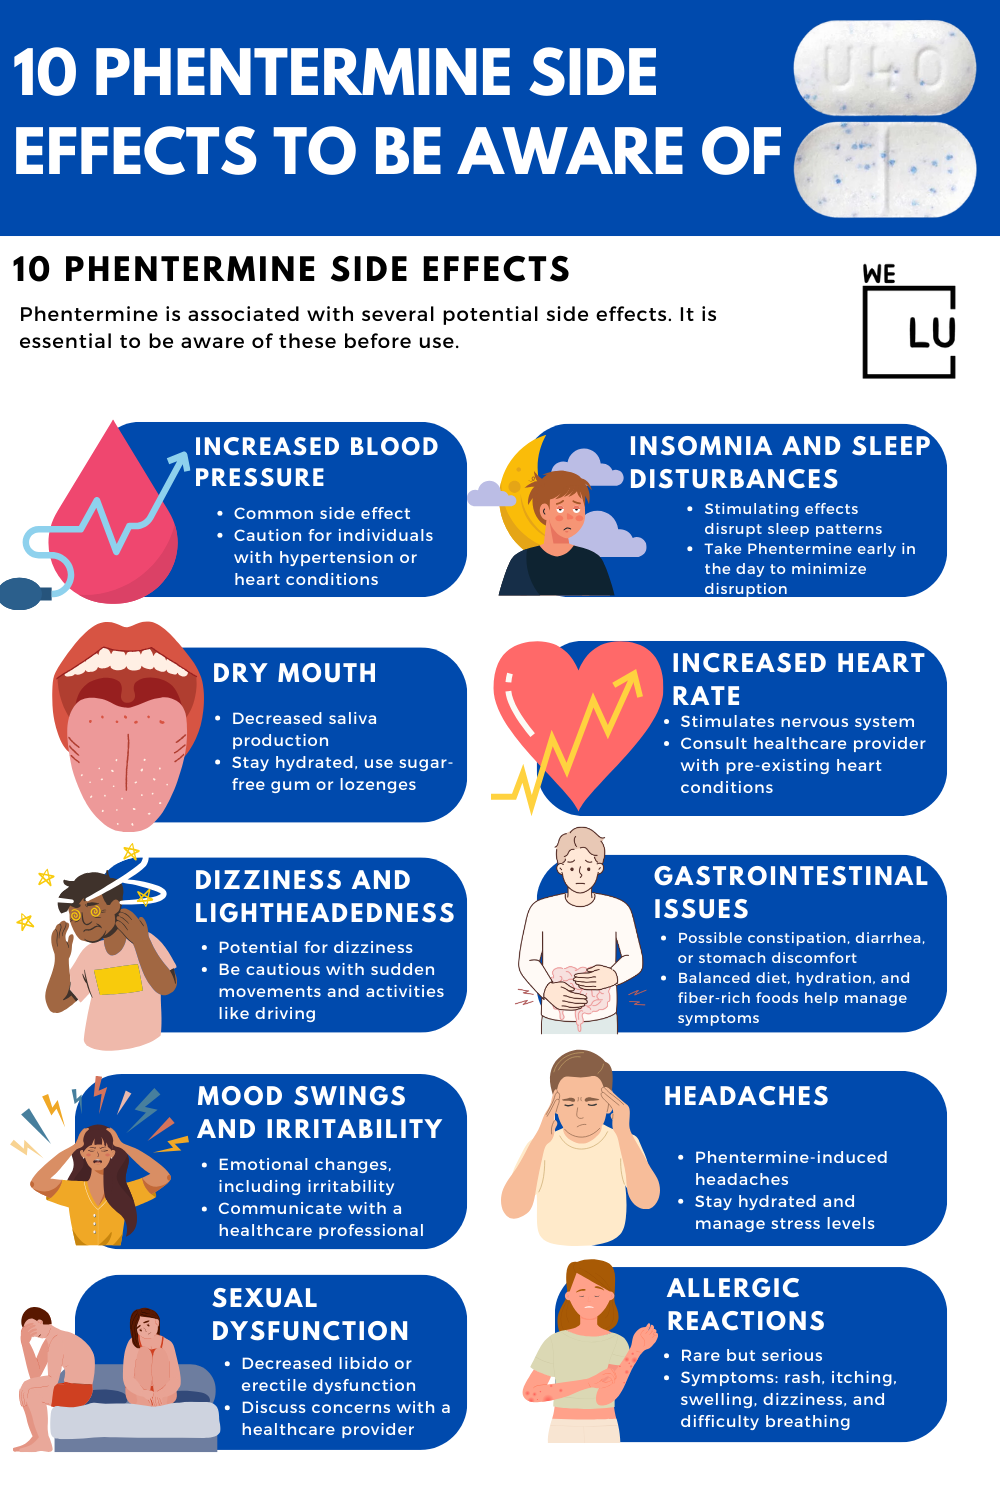 Discover the top 10 Phentermine side effects to be aware of before using the drug. Phentermine side effects in females and Phentermine side effects in males are similar, but there are some differences. Read on for more.